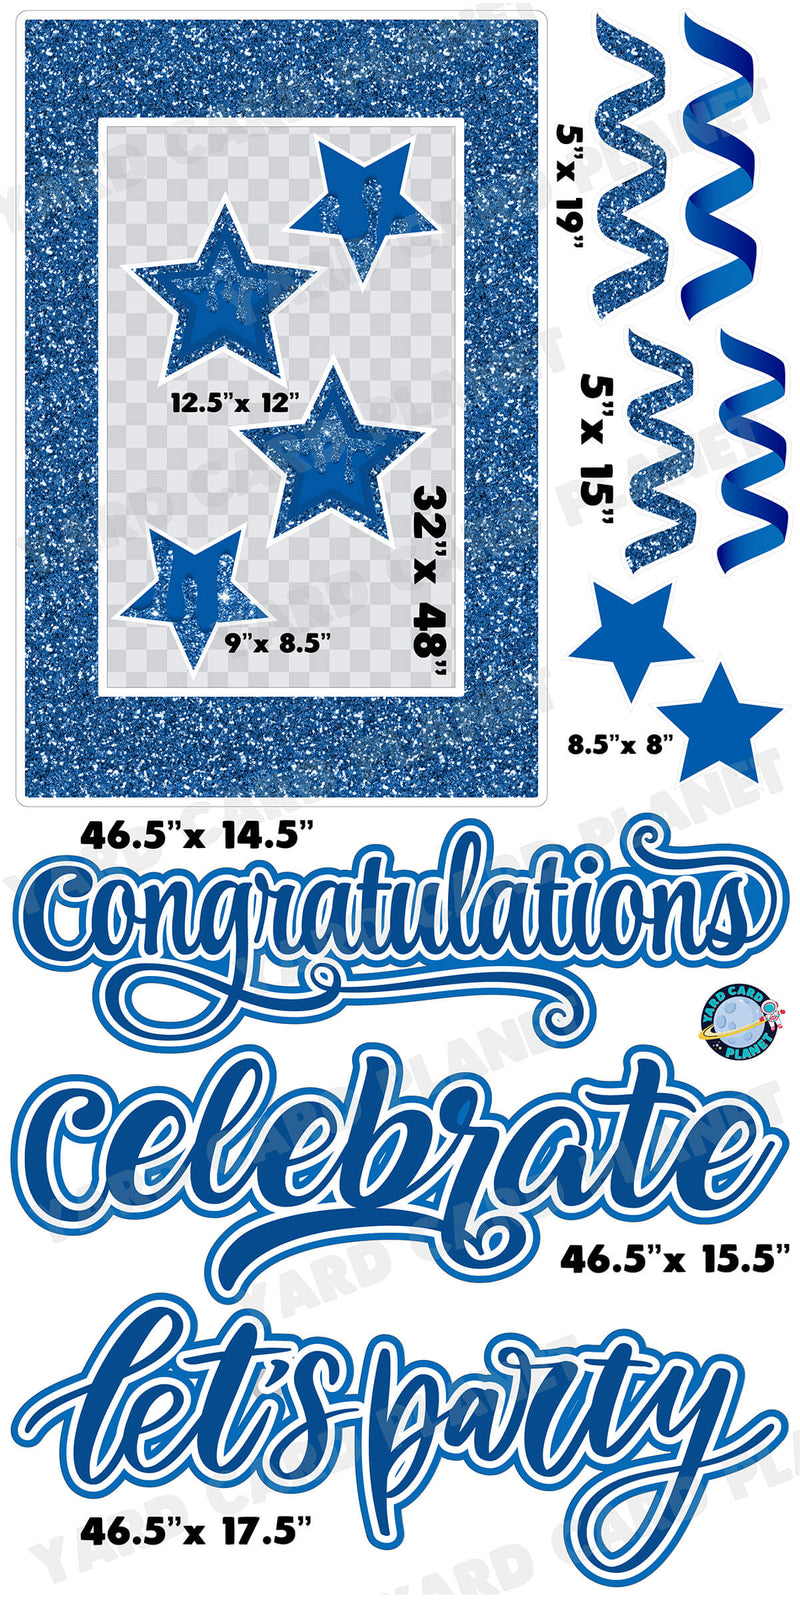 Blue Glitter Multi Purpose EZ Frame with Interchangeable Greetings and Matching Yard Card Flair Set